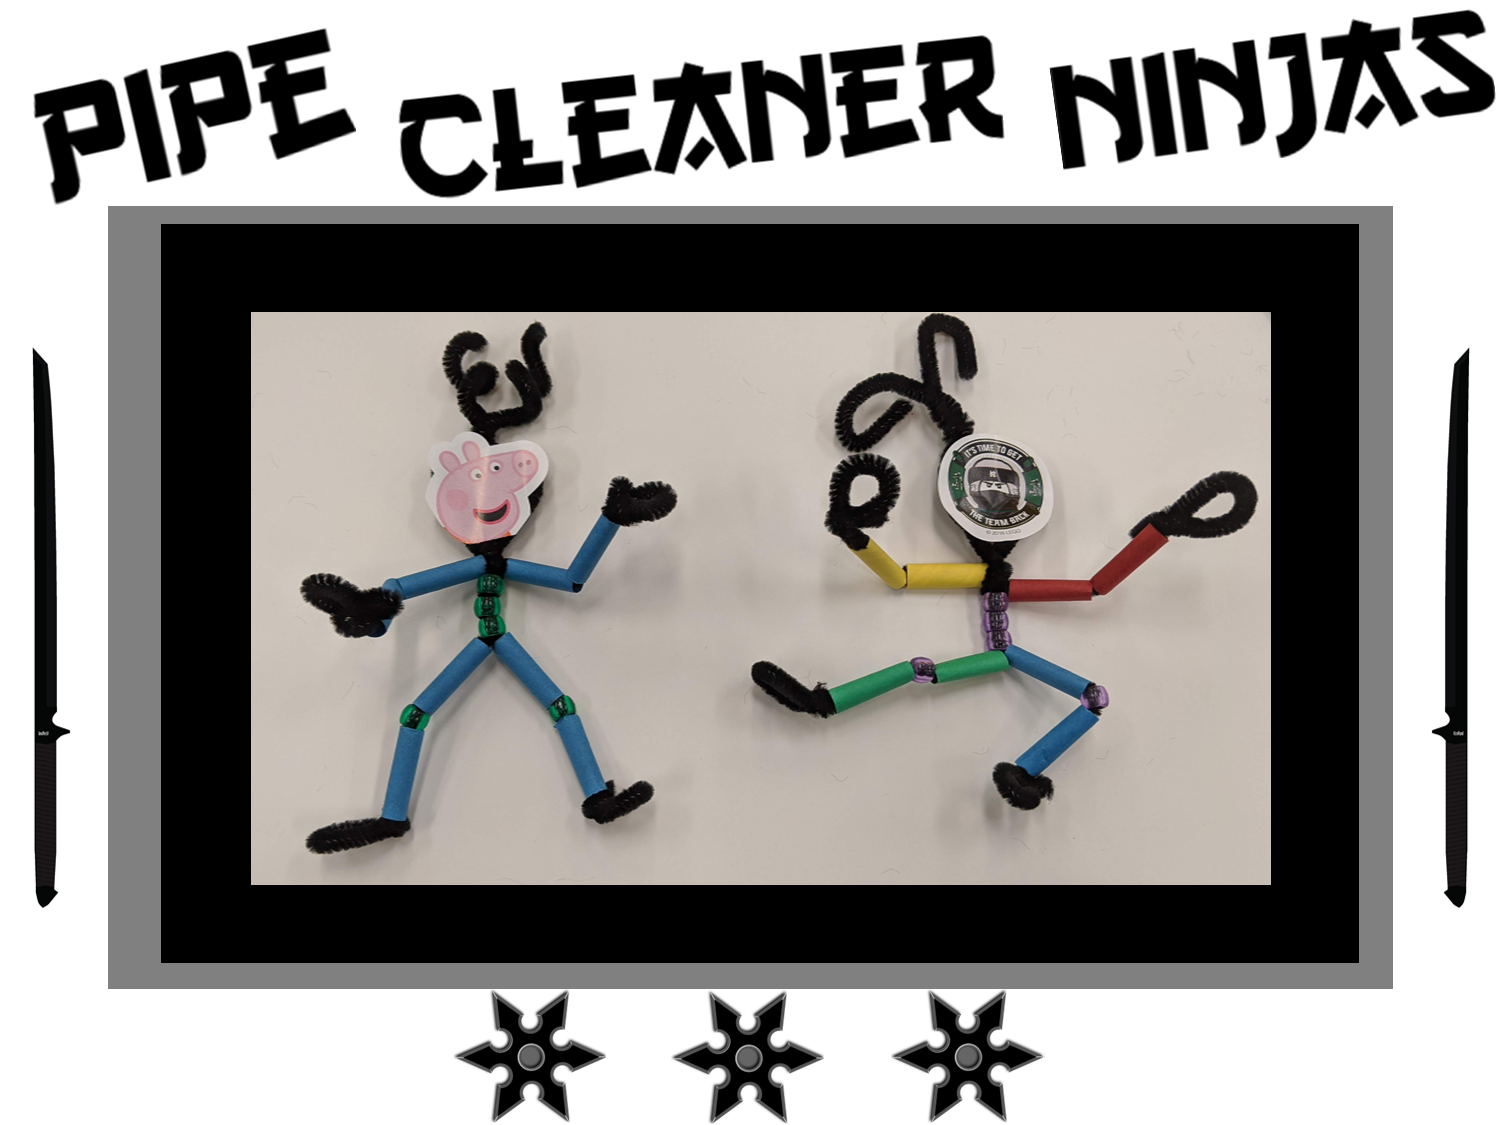 Pipe Cleaner Ninja take home craft @ Main Library. Pick one up via curbside beginning July 27th while supplies last.